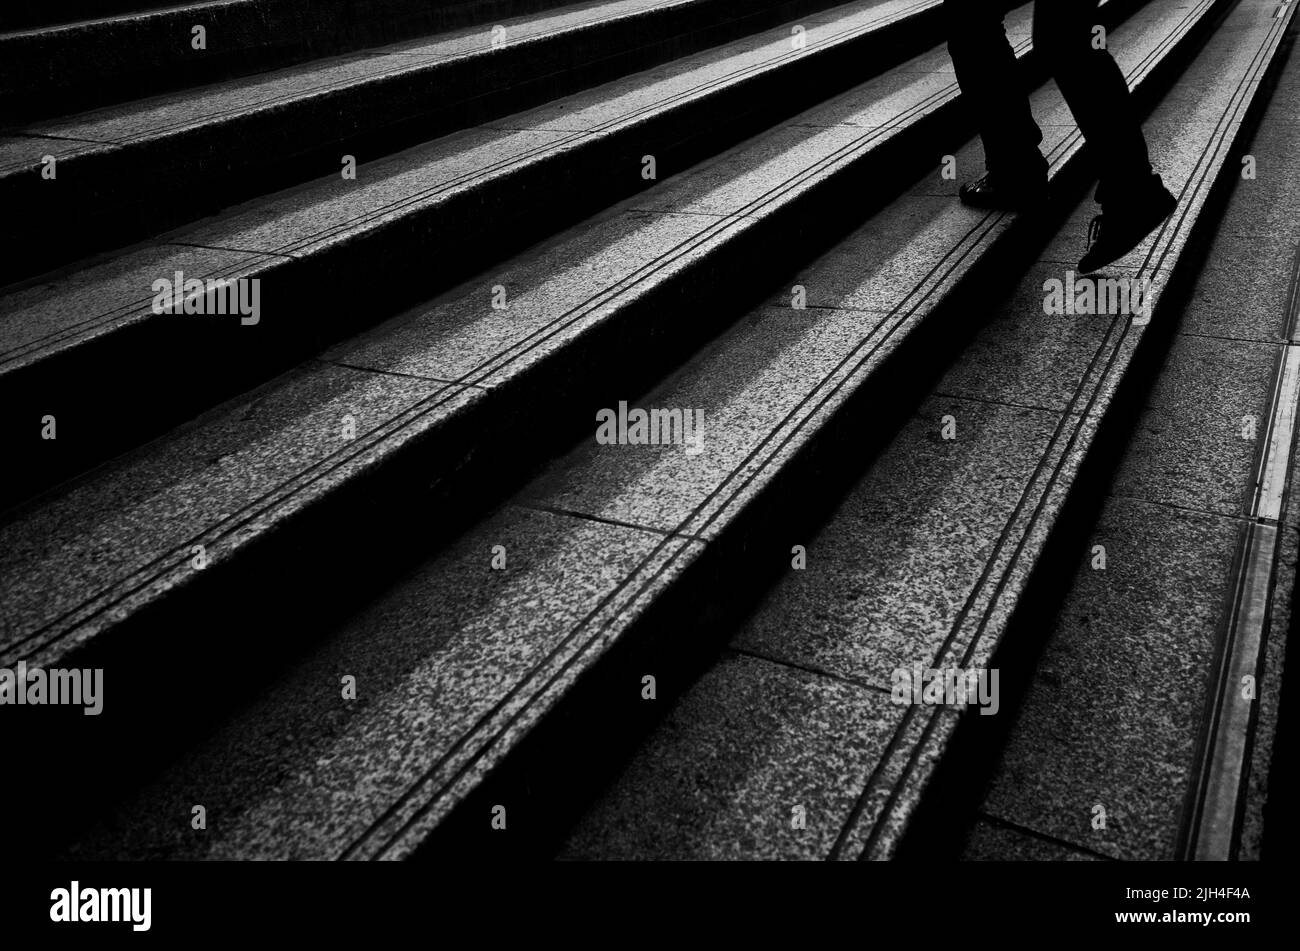 keep moving forward like stepping up stair step by step Stock Photo